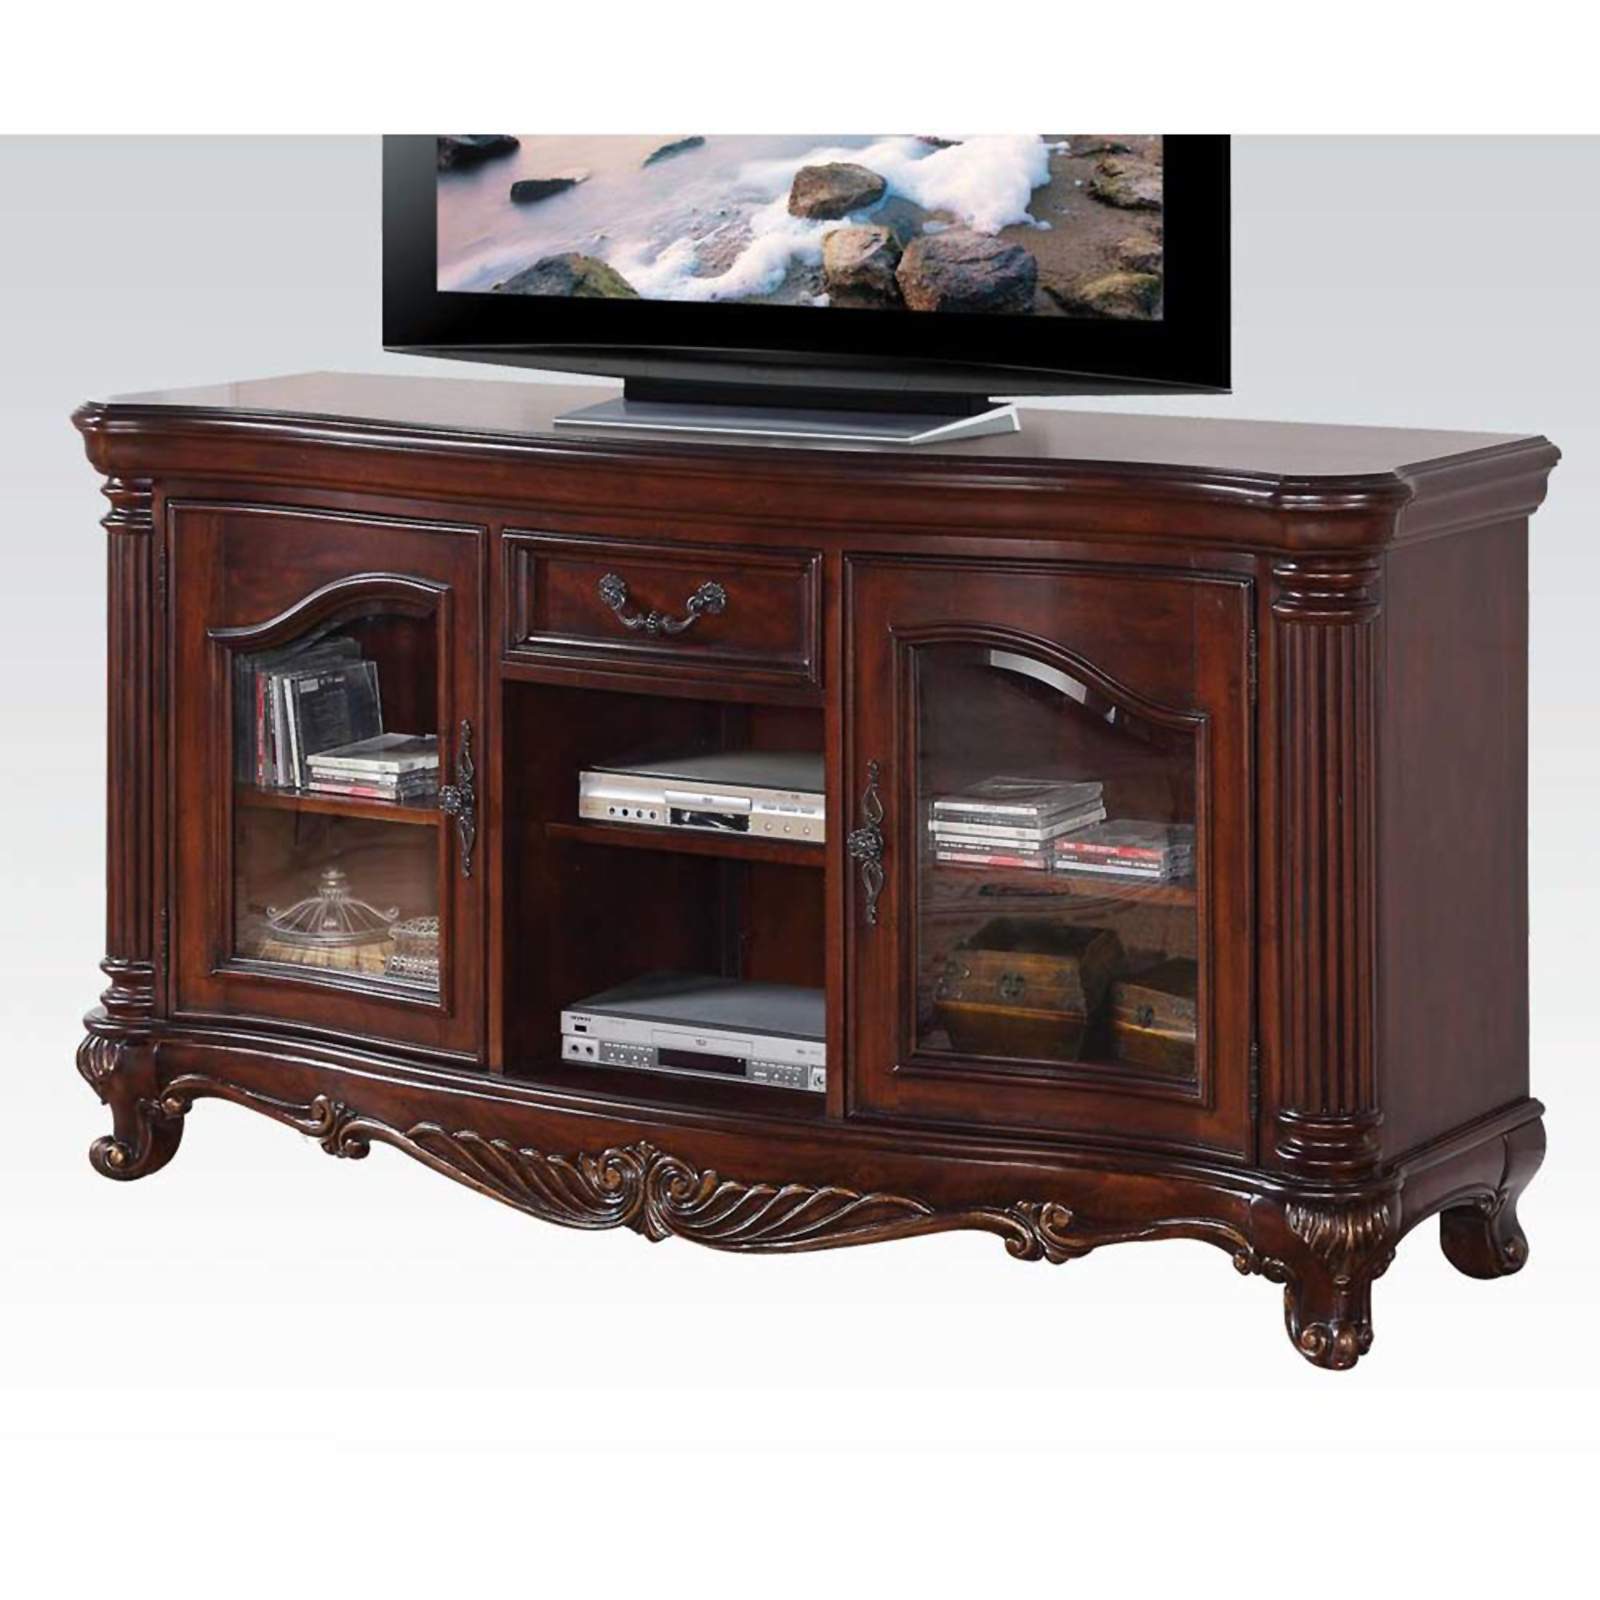 Acme Furniture Remington 65" Wooden TV Stand - Brown Cherry